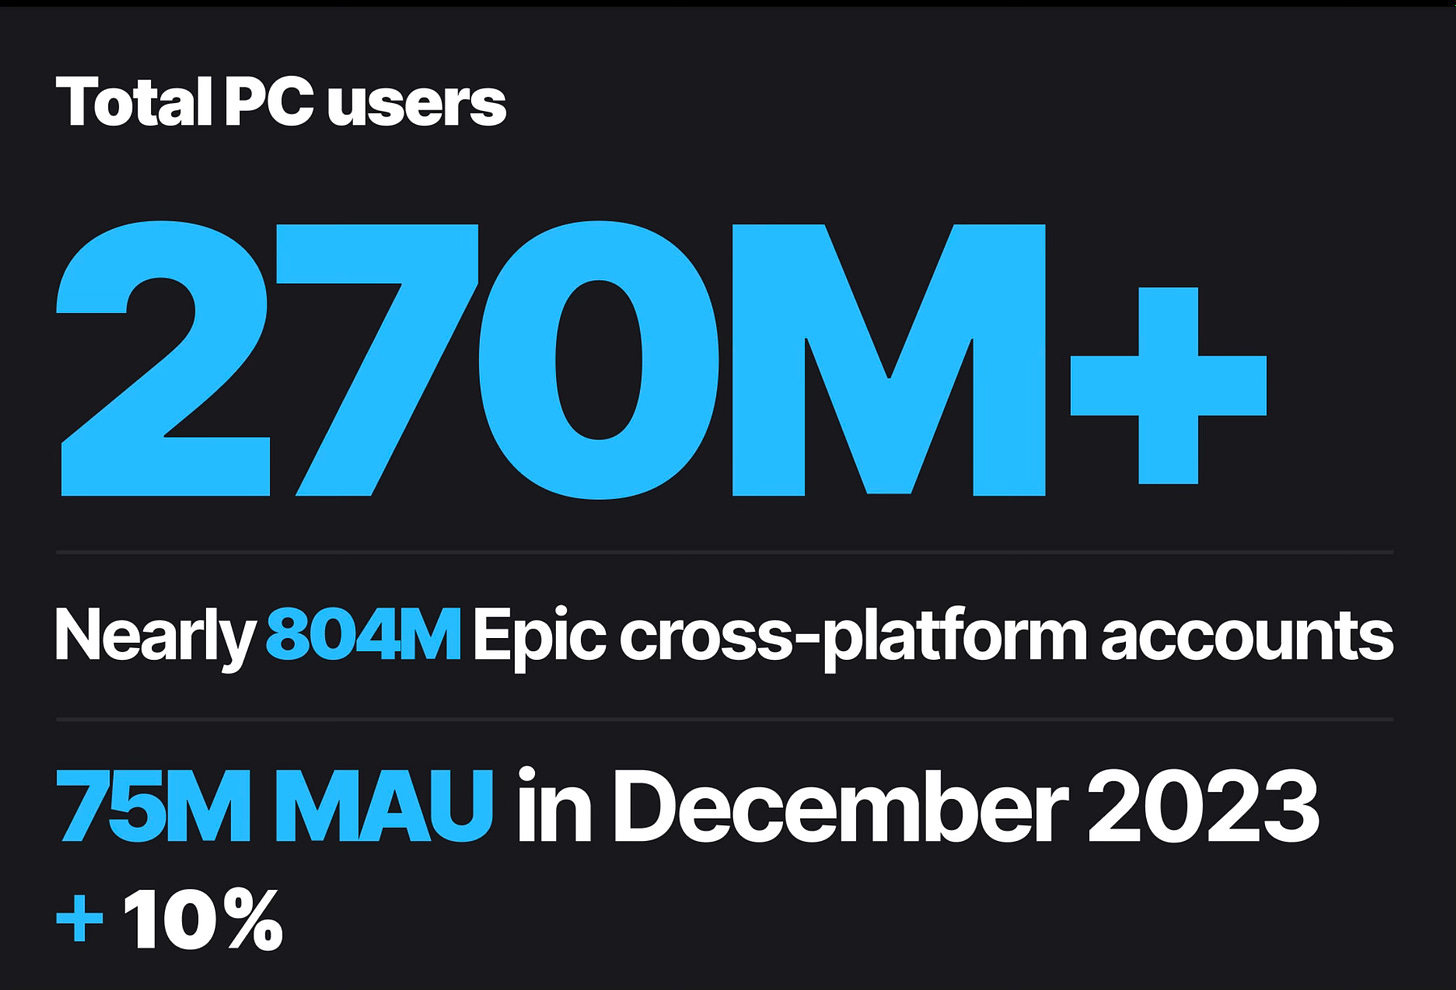 Epic Games Total PC Users